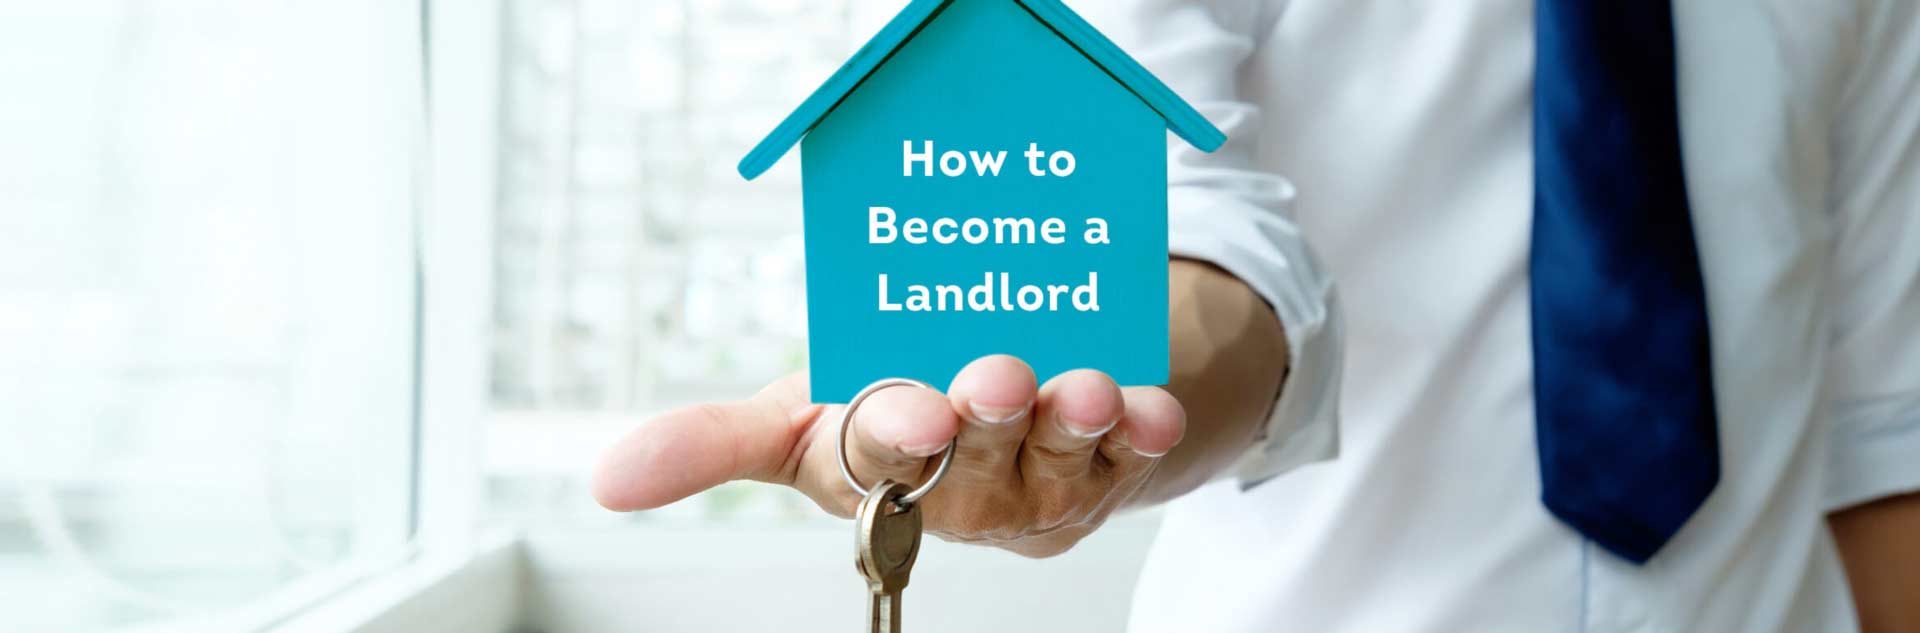 How to become a landlord in Nevada